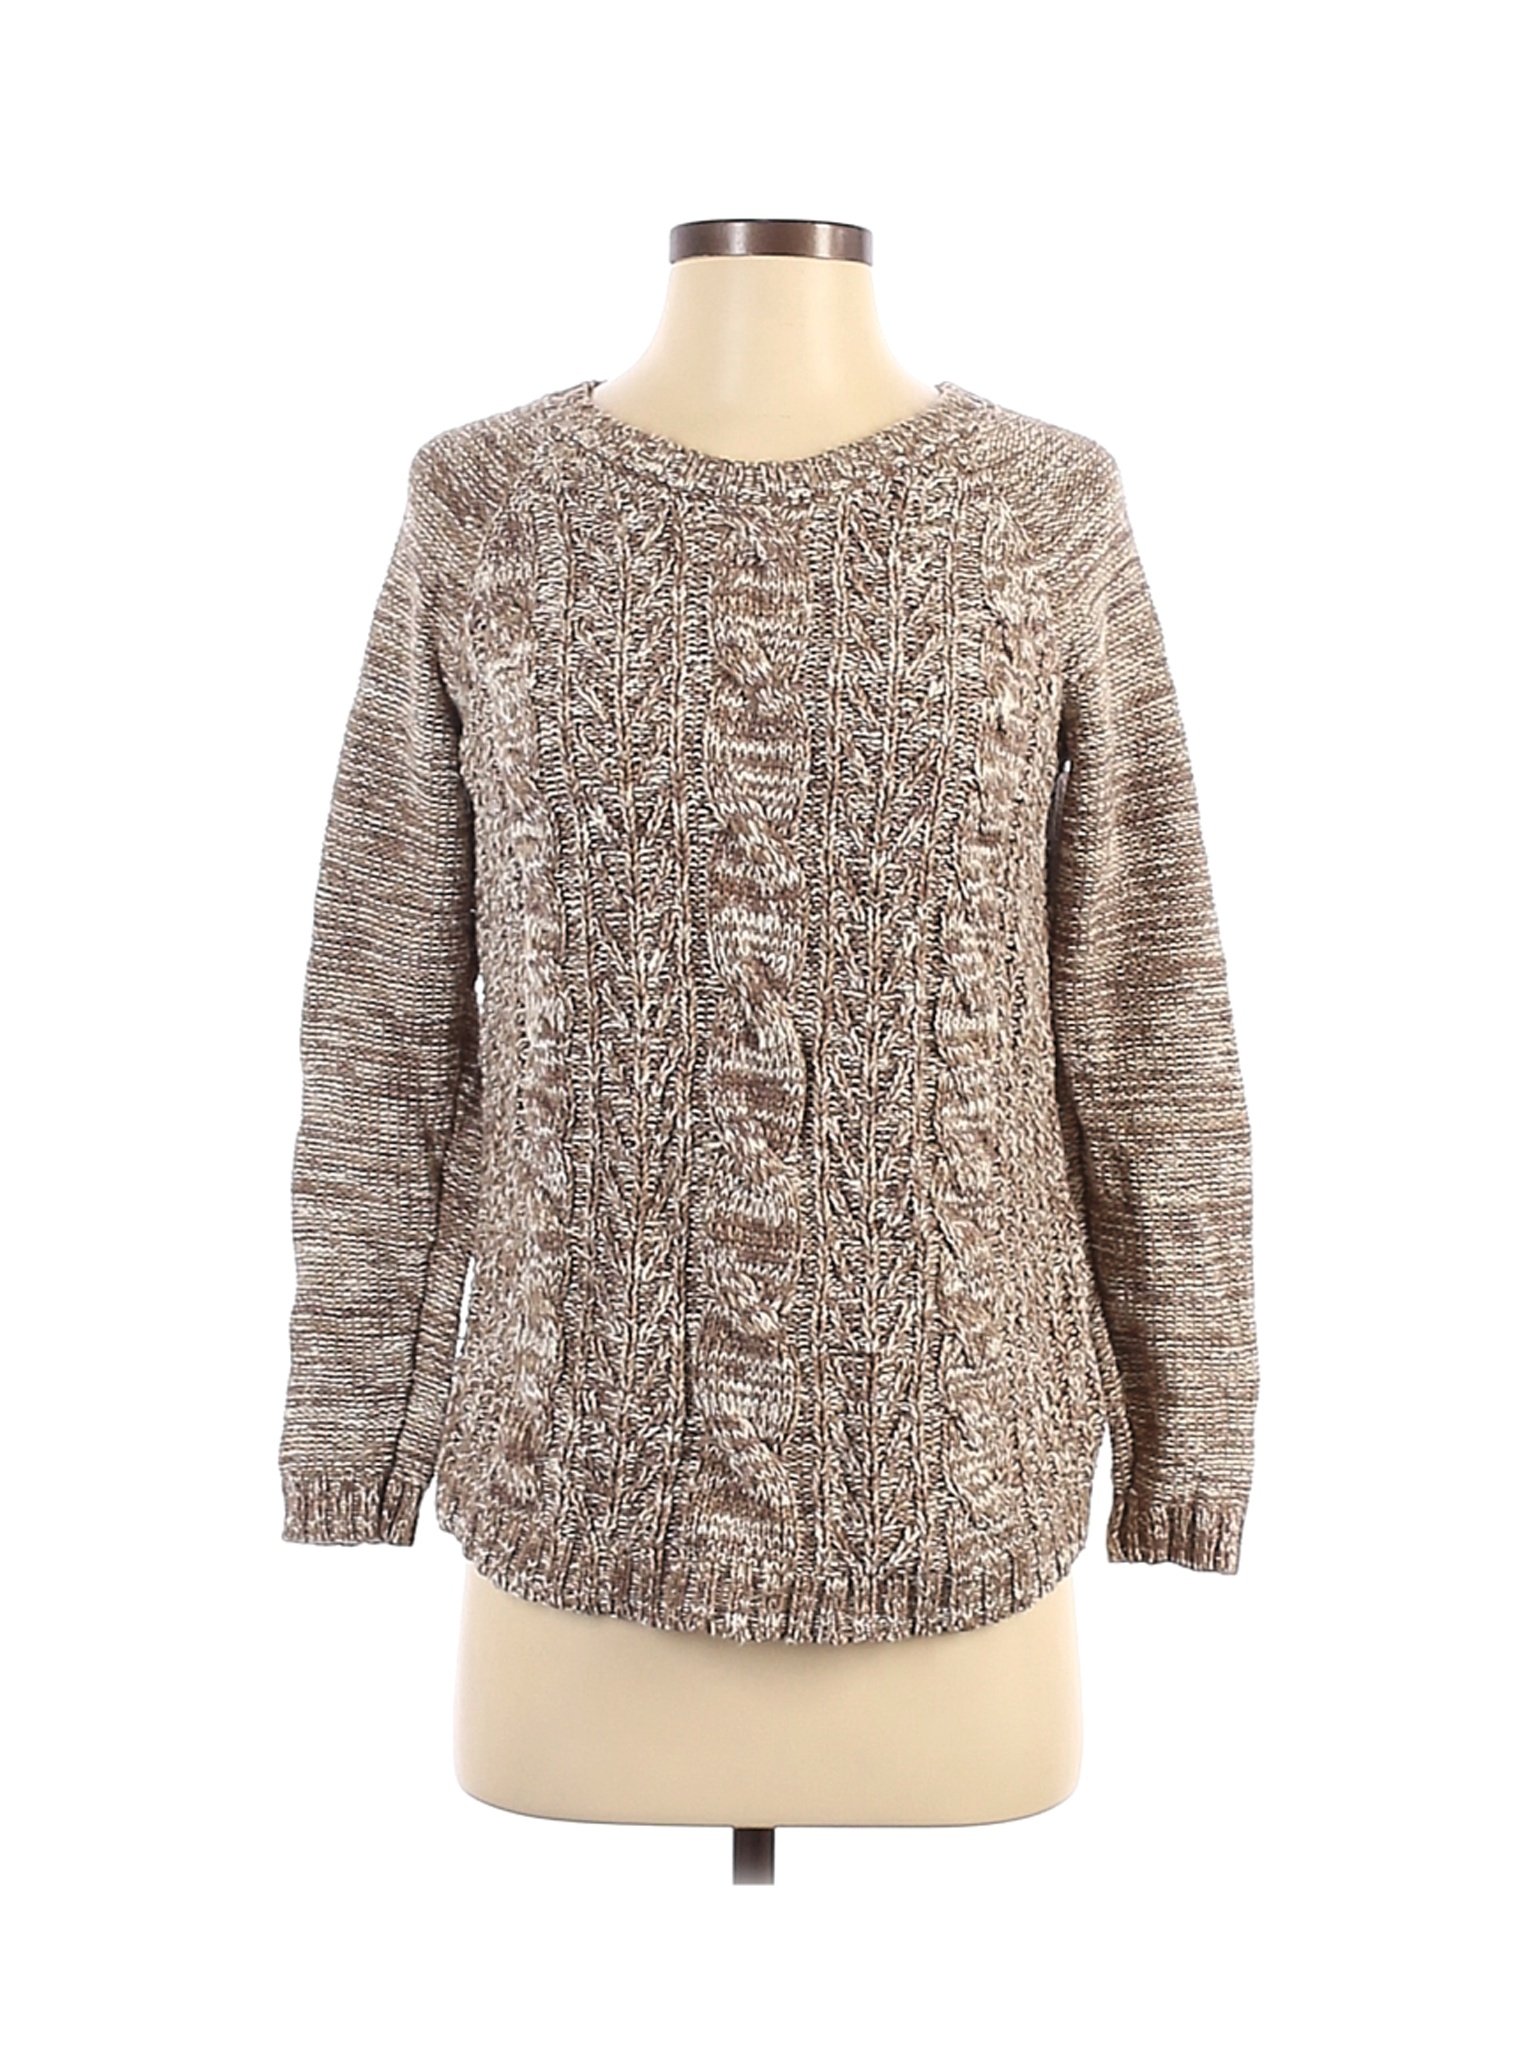 SONOMA life + style Women Brown Pullover Sweater S | eBay